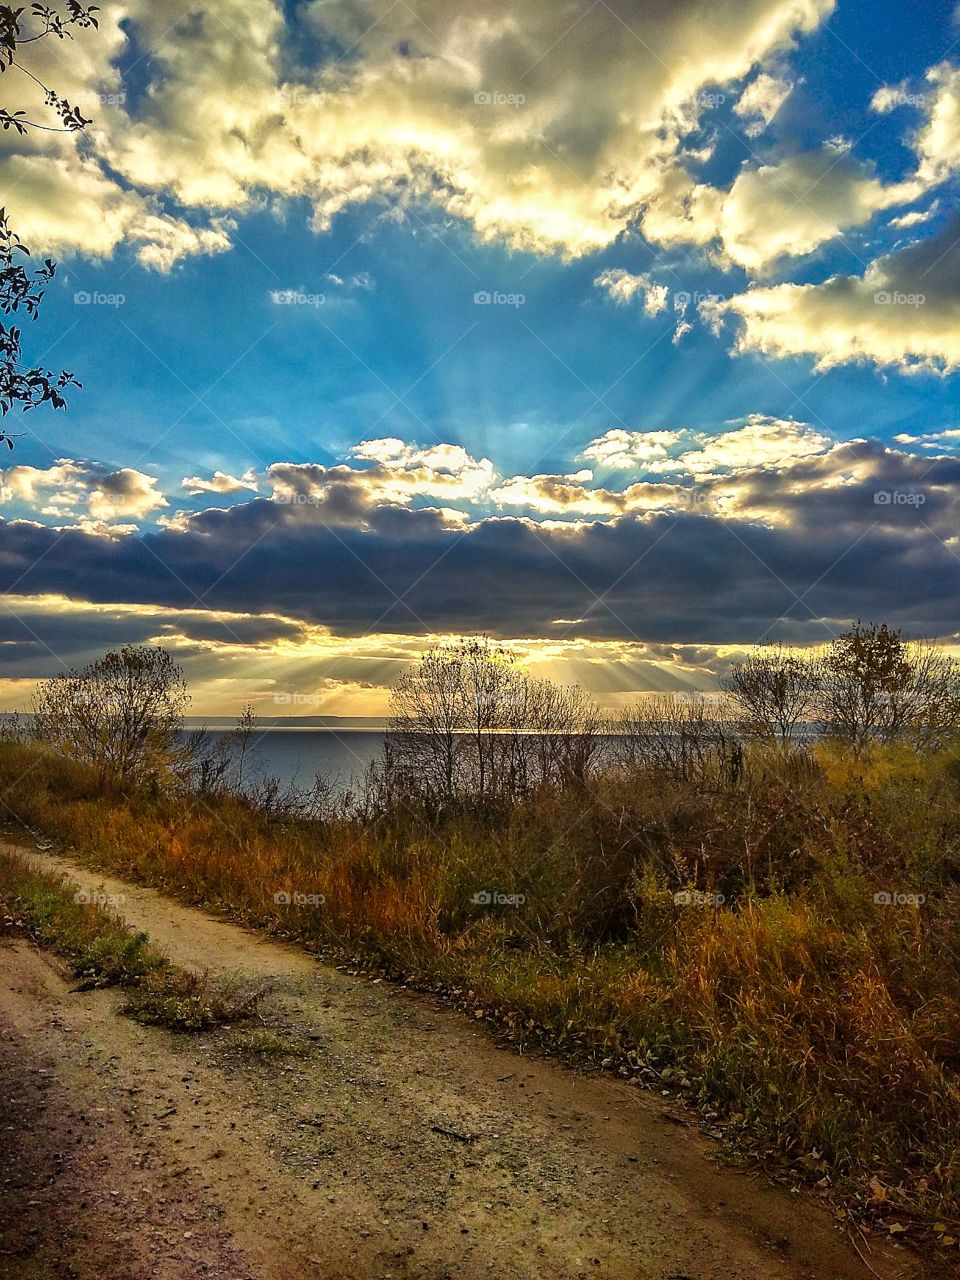 Very beautiful view of the Volga River (Russia) and the horizon on the opposite bank, footpath, bushes and trees covered with golden foliage in the foreground, under the blue sky covered with clouds and rays of the setting sun